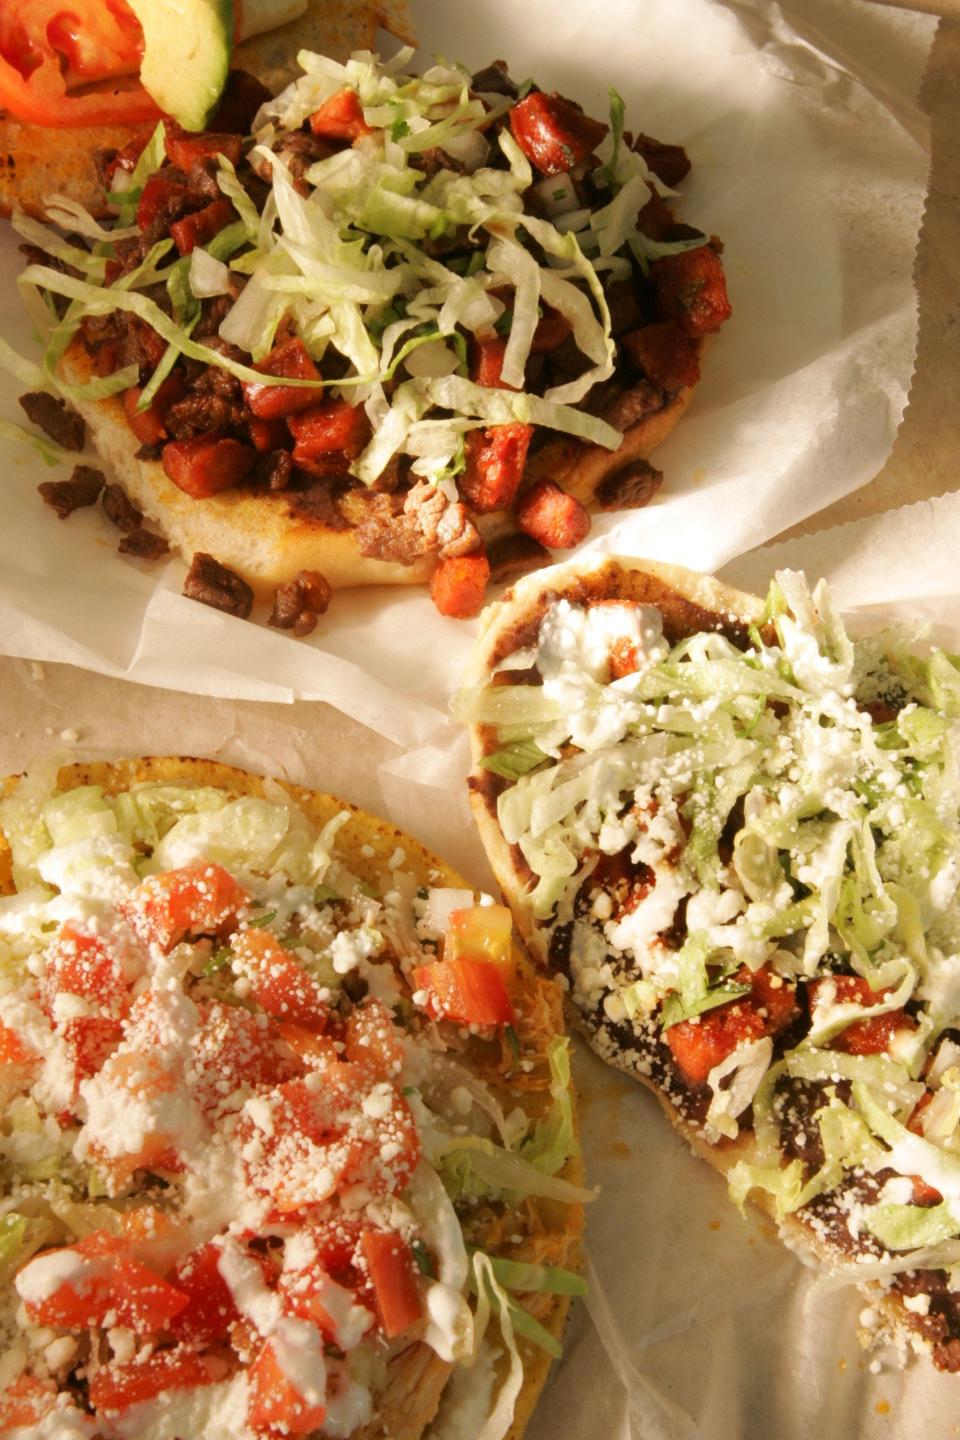 A sampling from La Lupita Tacos Mexicanos. At top is a Mexican torta with chorizo, fried pork, and steak. At bottom left is a chicken tostada, and at right is a huarache with chorizo and steak.